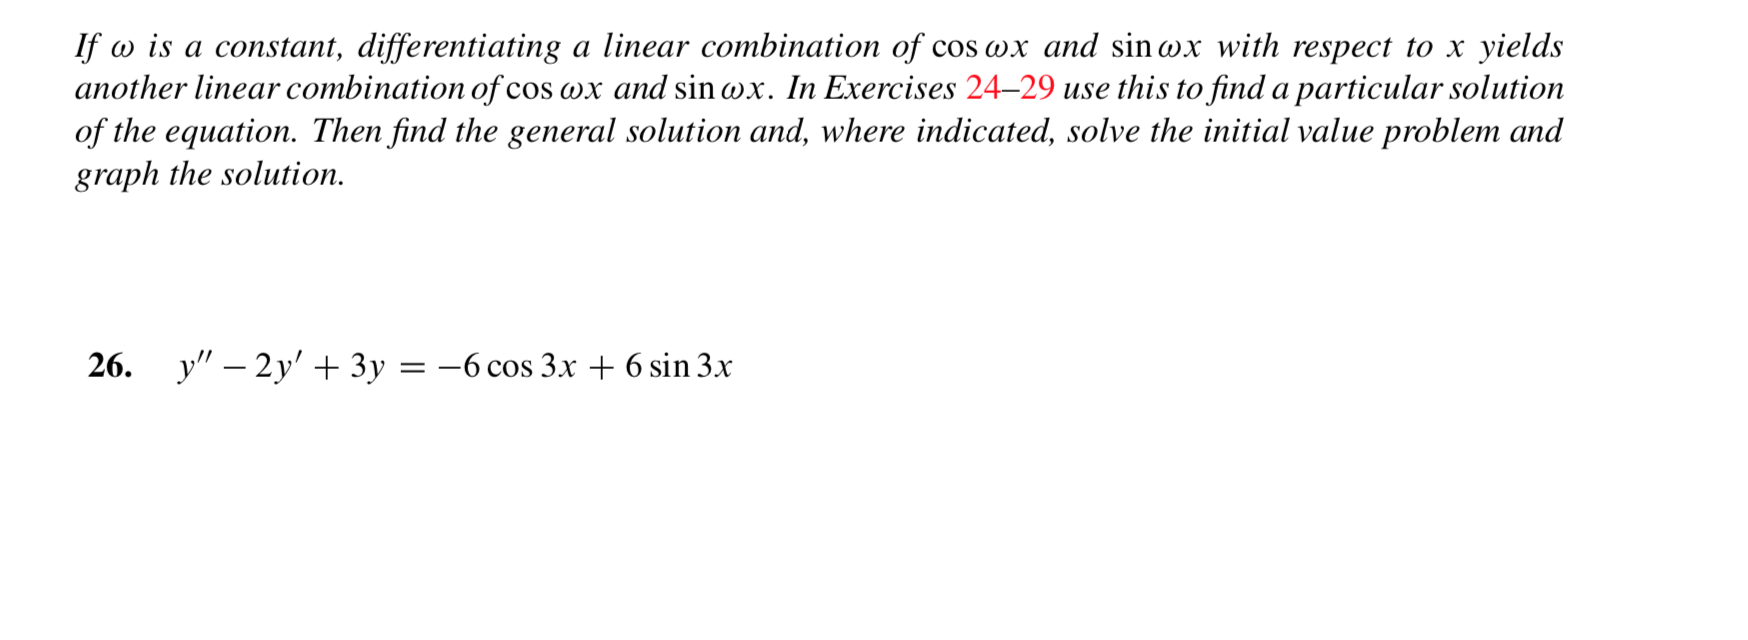 If is a constant, differentiating a linear combination of cos wx and sinwx with respect to x yields
another linear combination of
of the equation. Then find the general solution and, where indicated, solve the initial value problem and
graph the solution
'cos wx and sinwx. In Exercises 24-29 use this to find a particular solution
у" - 2y' + 3у 3D — 6 сos 3х + 6 sin 3x
26.
=
